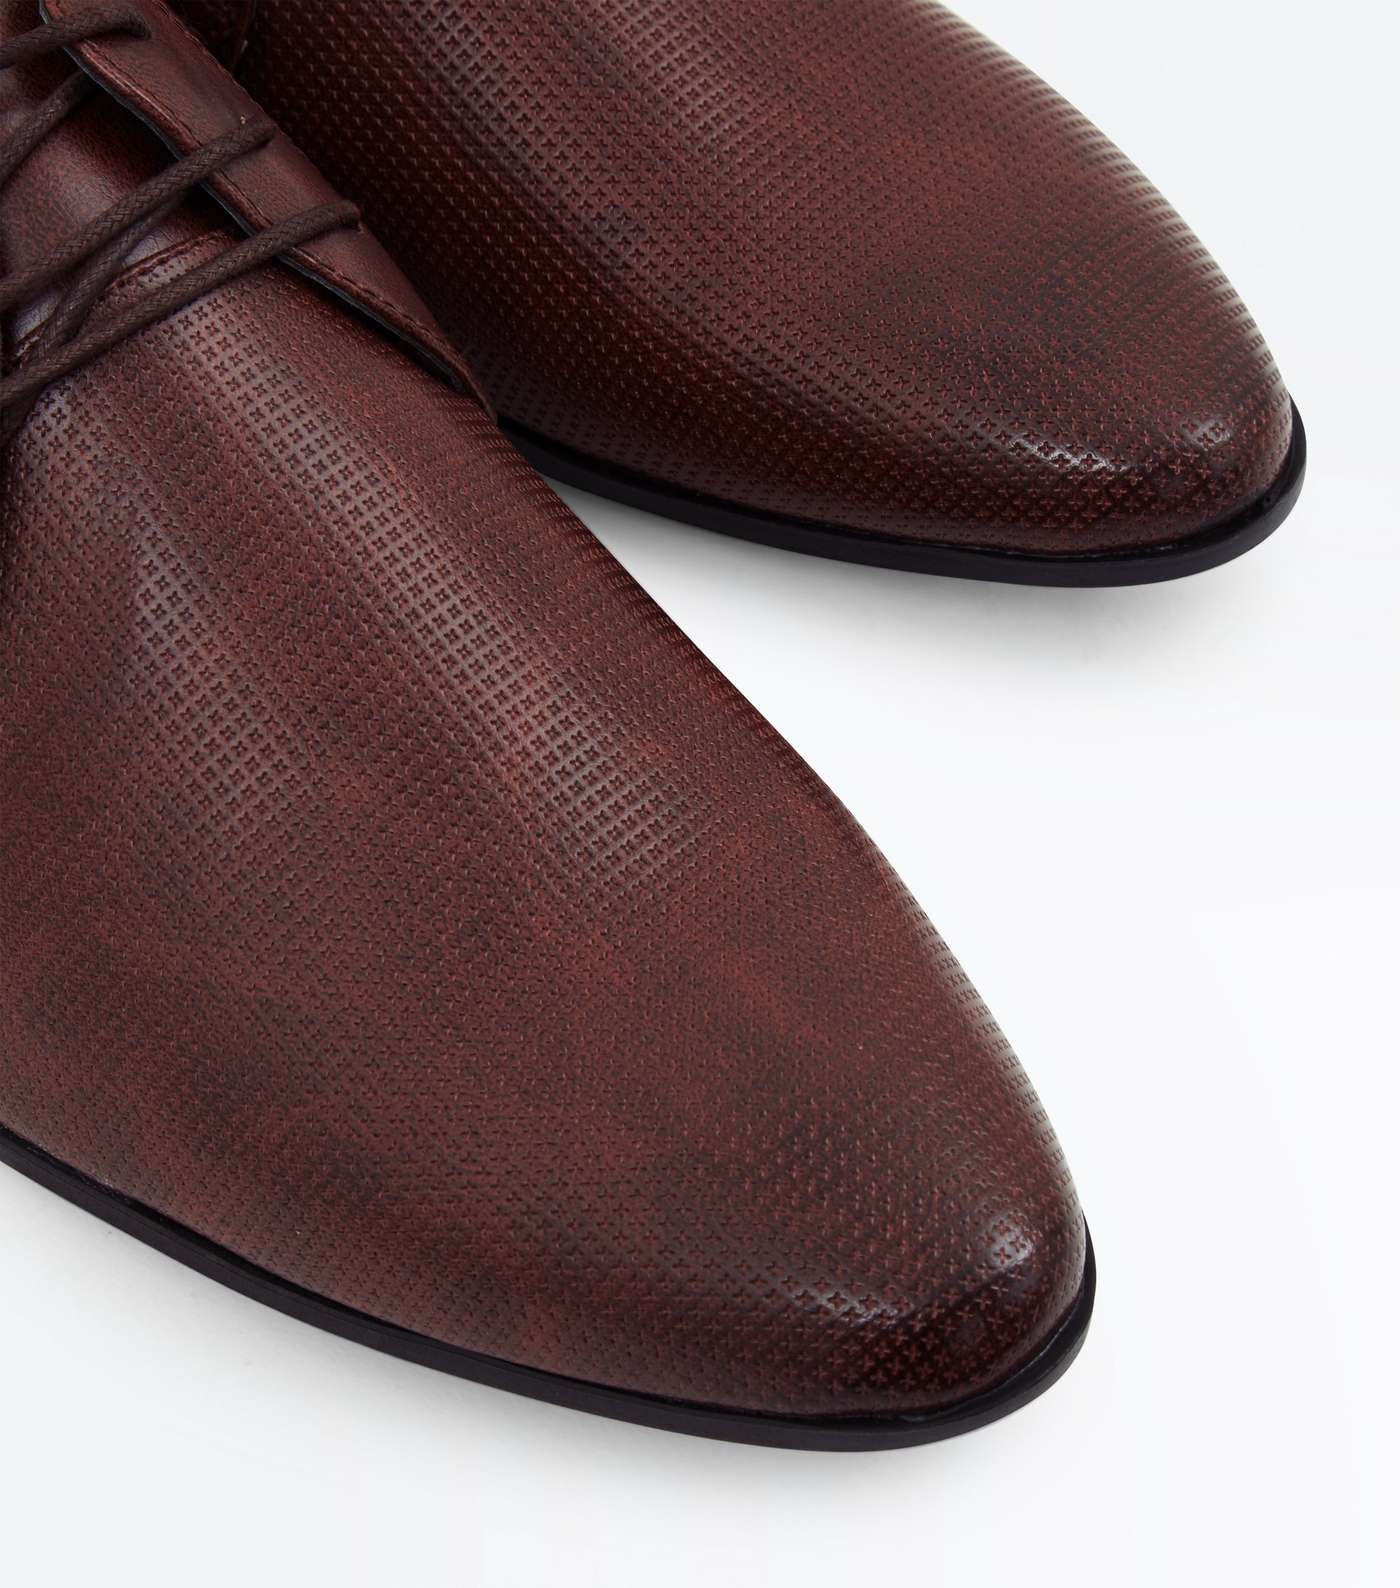 Dark Brown Perforated Lace Up Formal Shoes Image 3